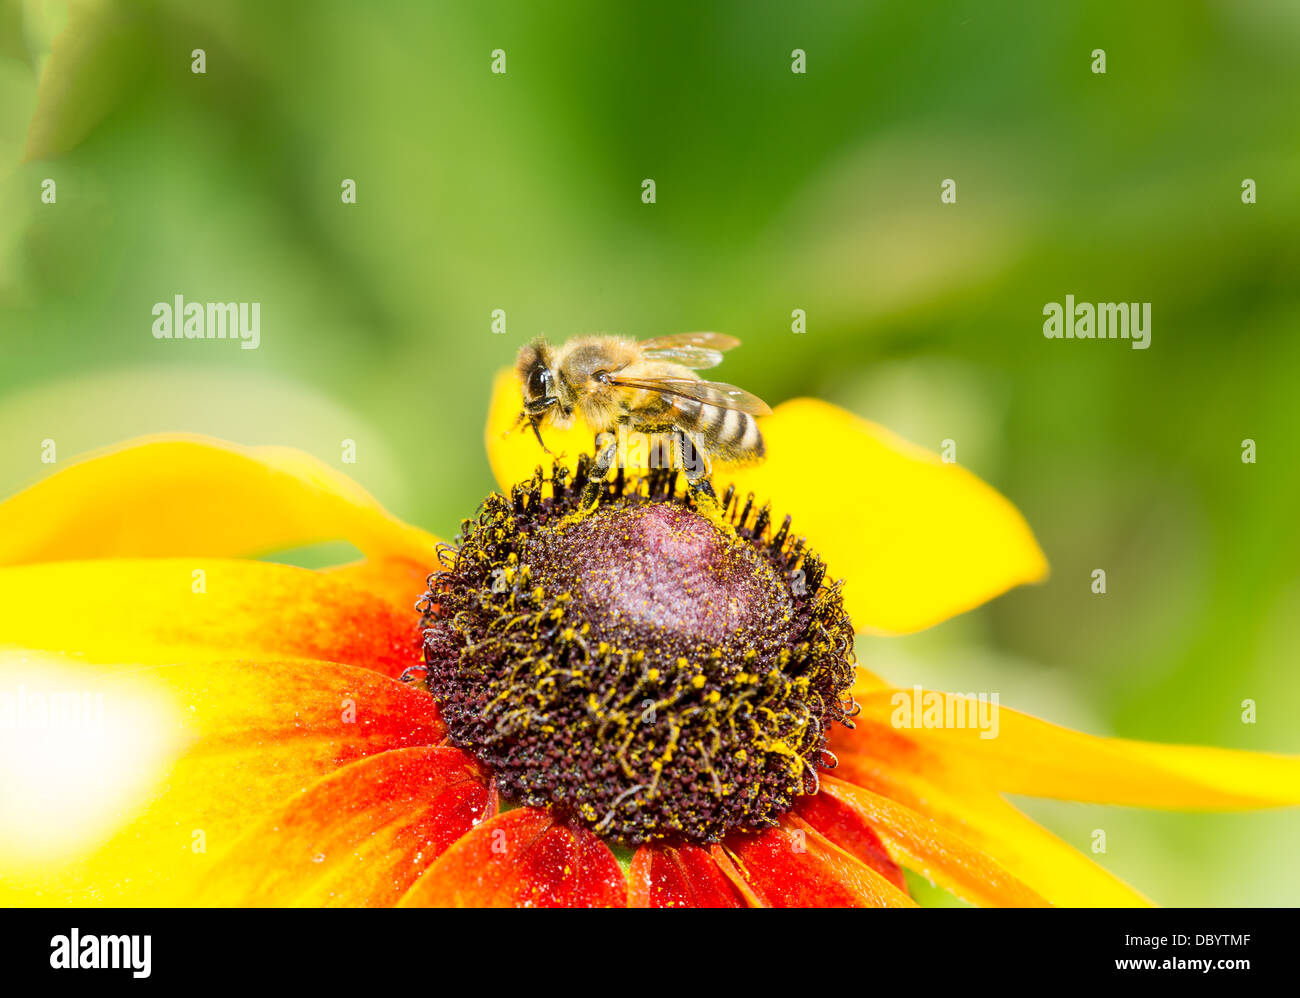 A bee drinking nectar on the yellow flower Stock Photo